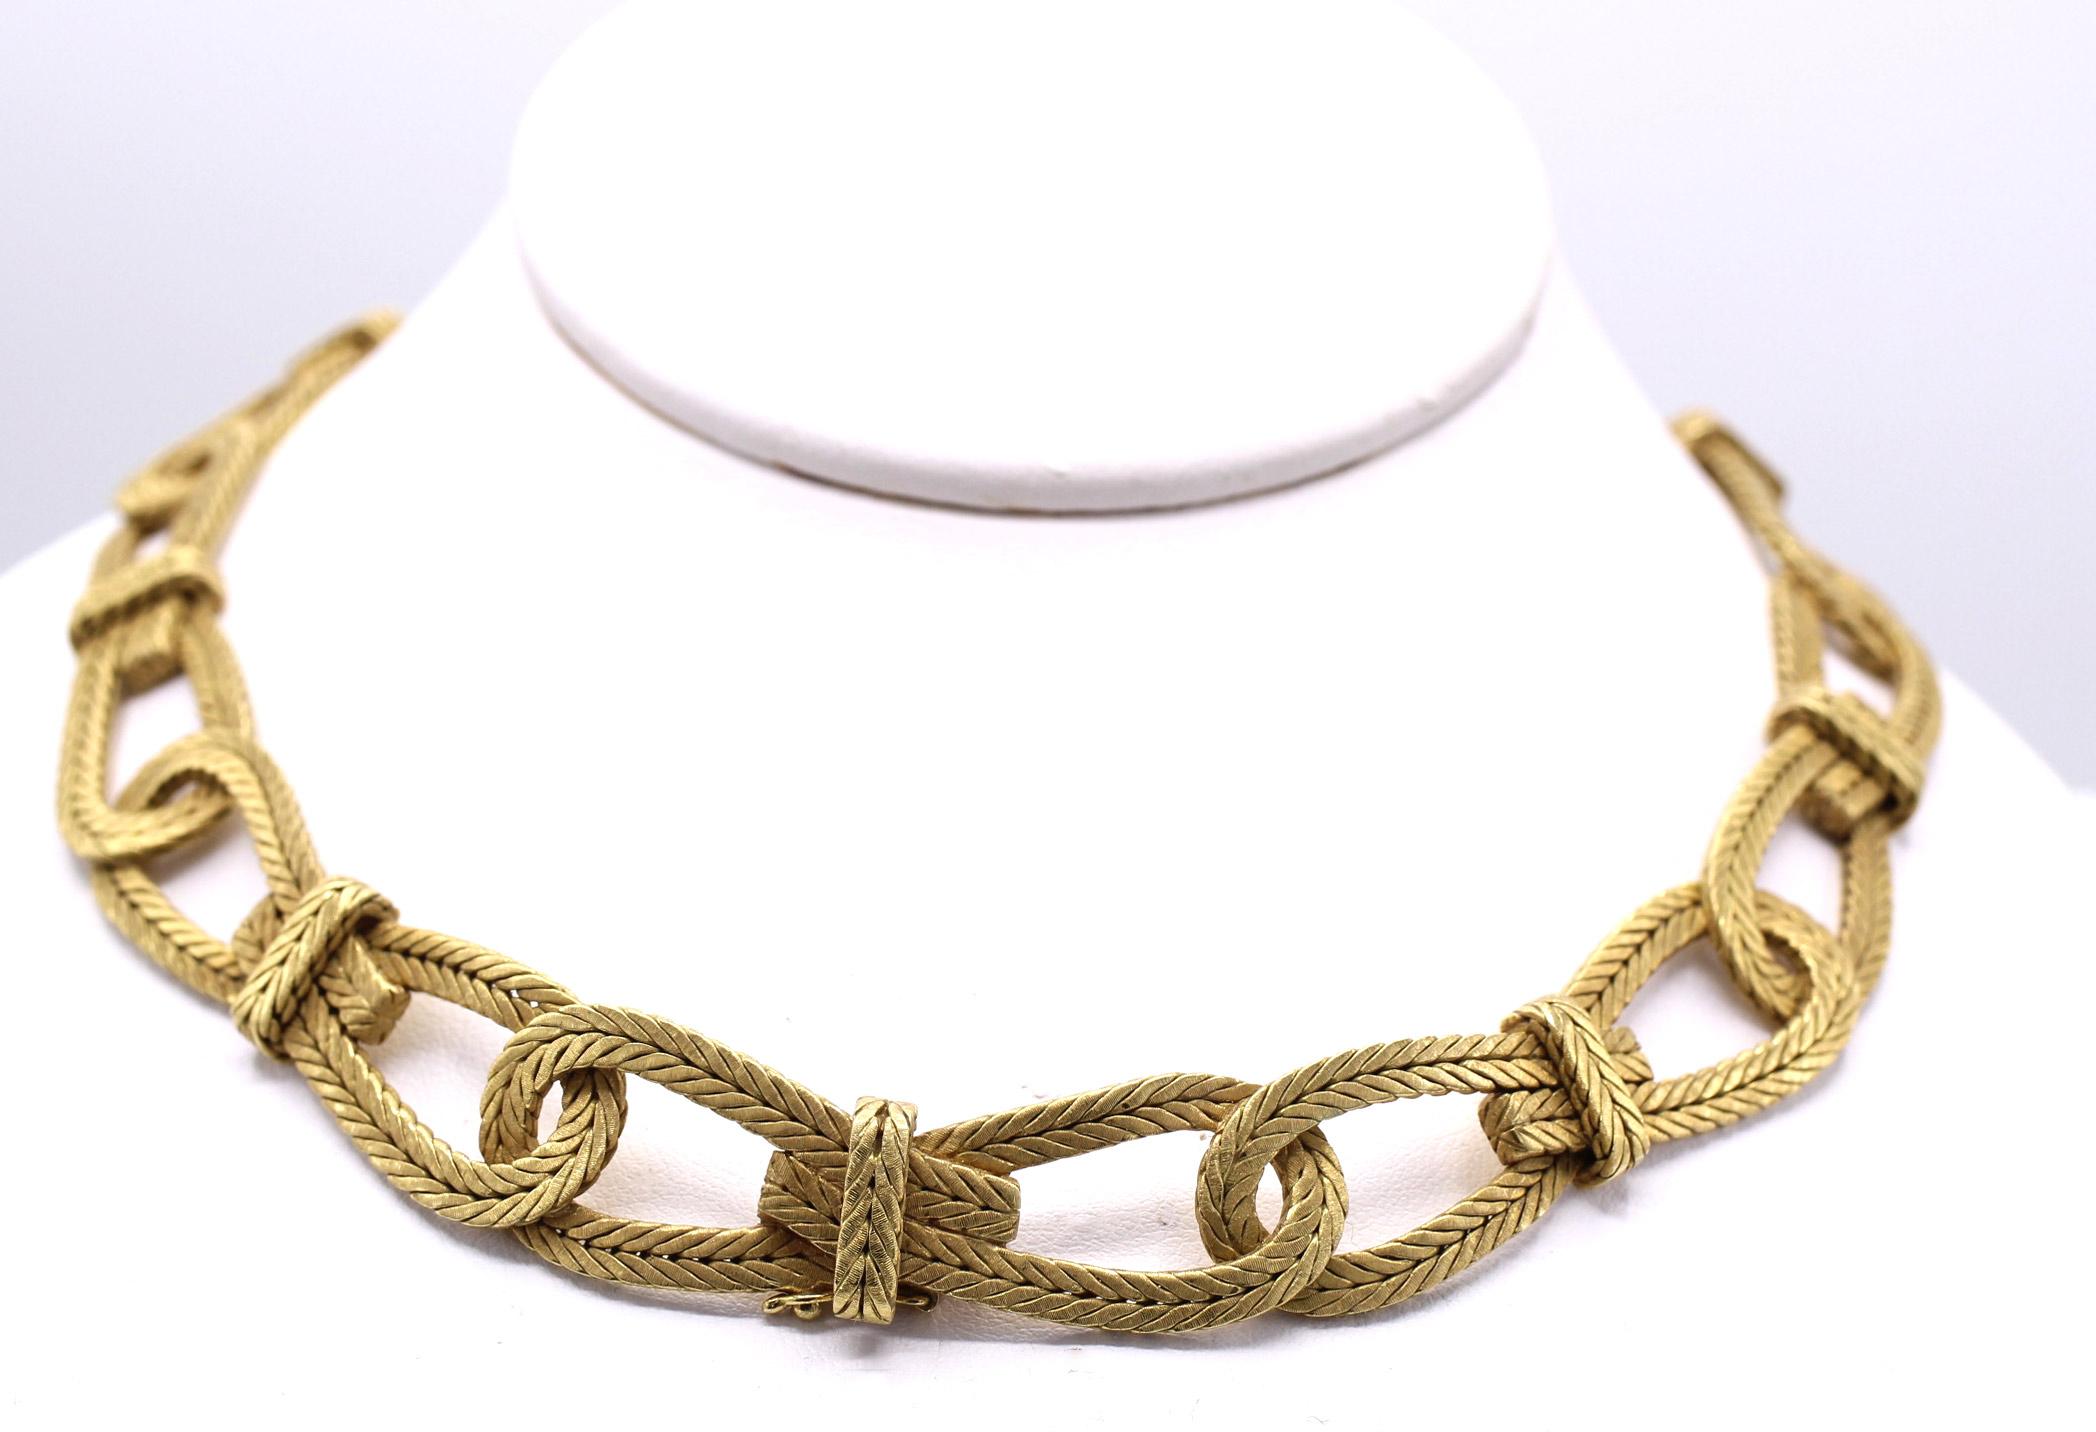 Beautifully designed and masterfully handcrafted in 18 karat yellow gold by the renown Italian jeweler Buccellati. Flexibly connected mat gold braided links make this wonderful necklace a chic and extremely stylish every-day wear. Signed 